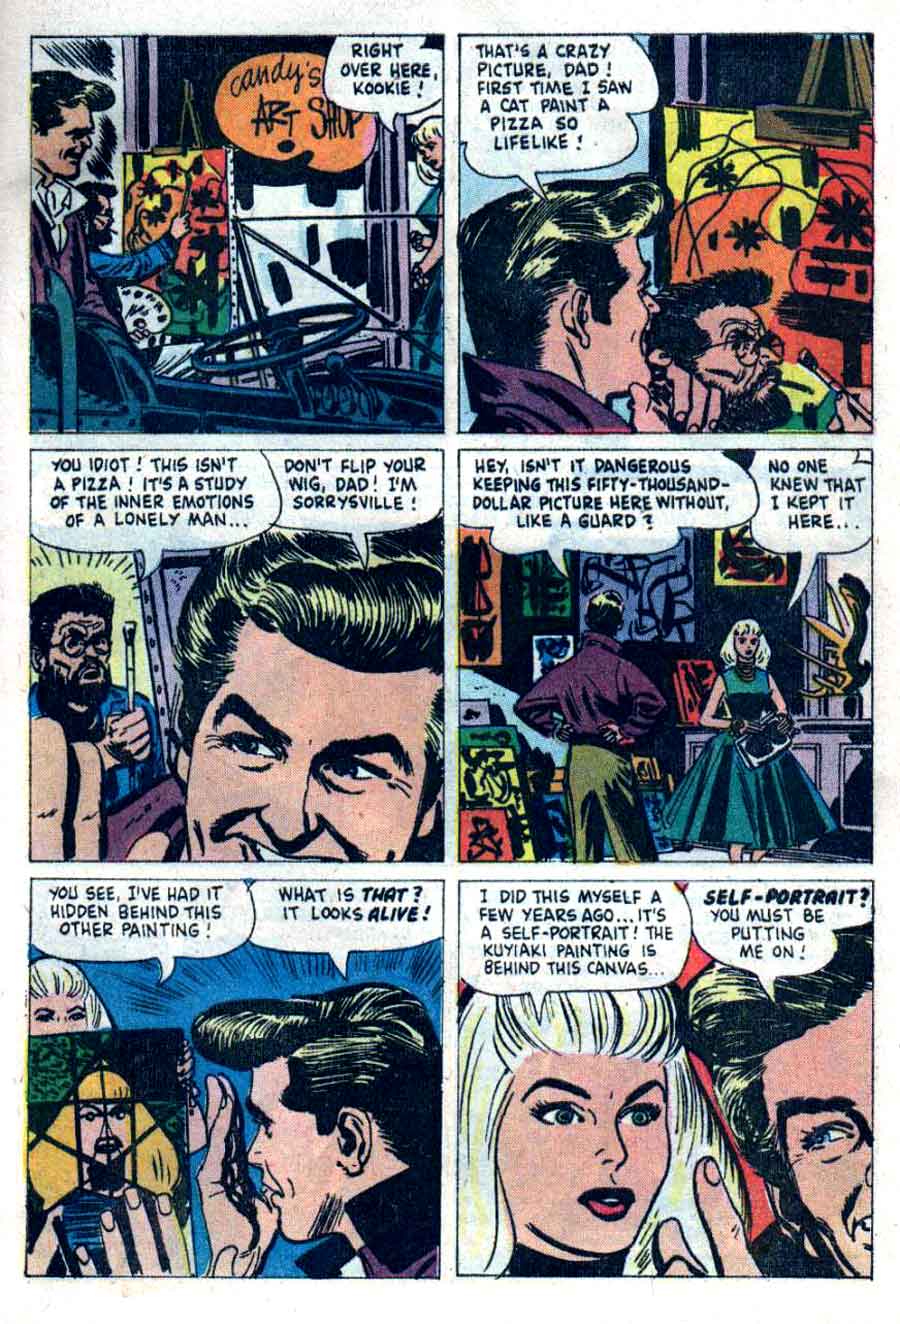 77 Sunset Strip / Four Color Comics #1066 dell tv 1960s silver age comic book page art by Alex Toth